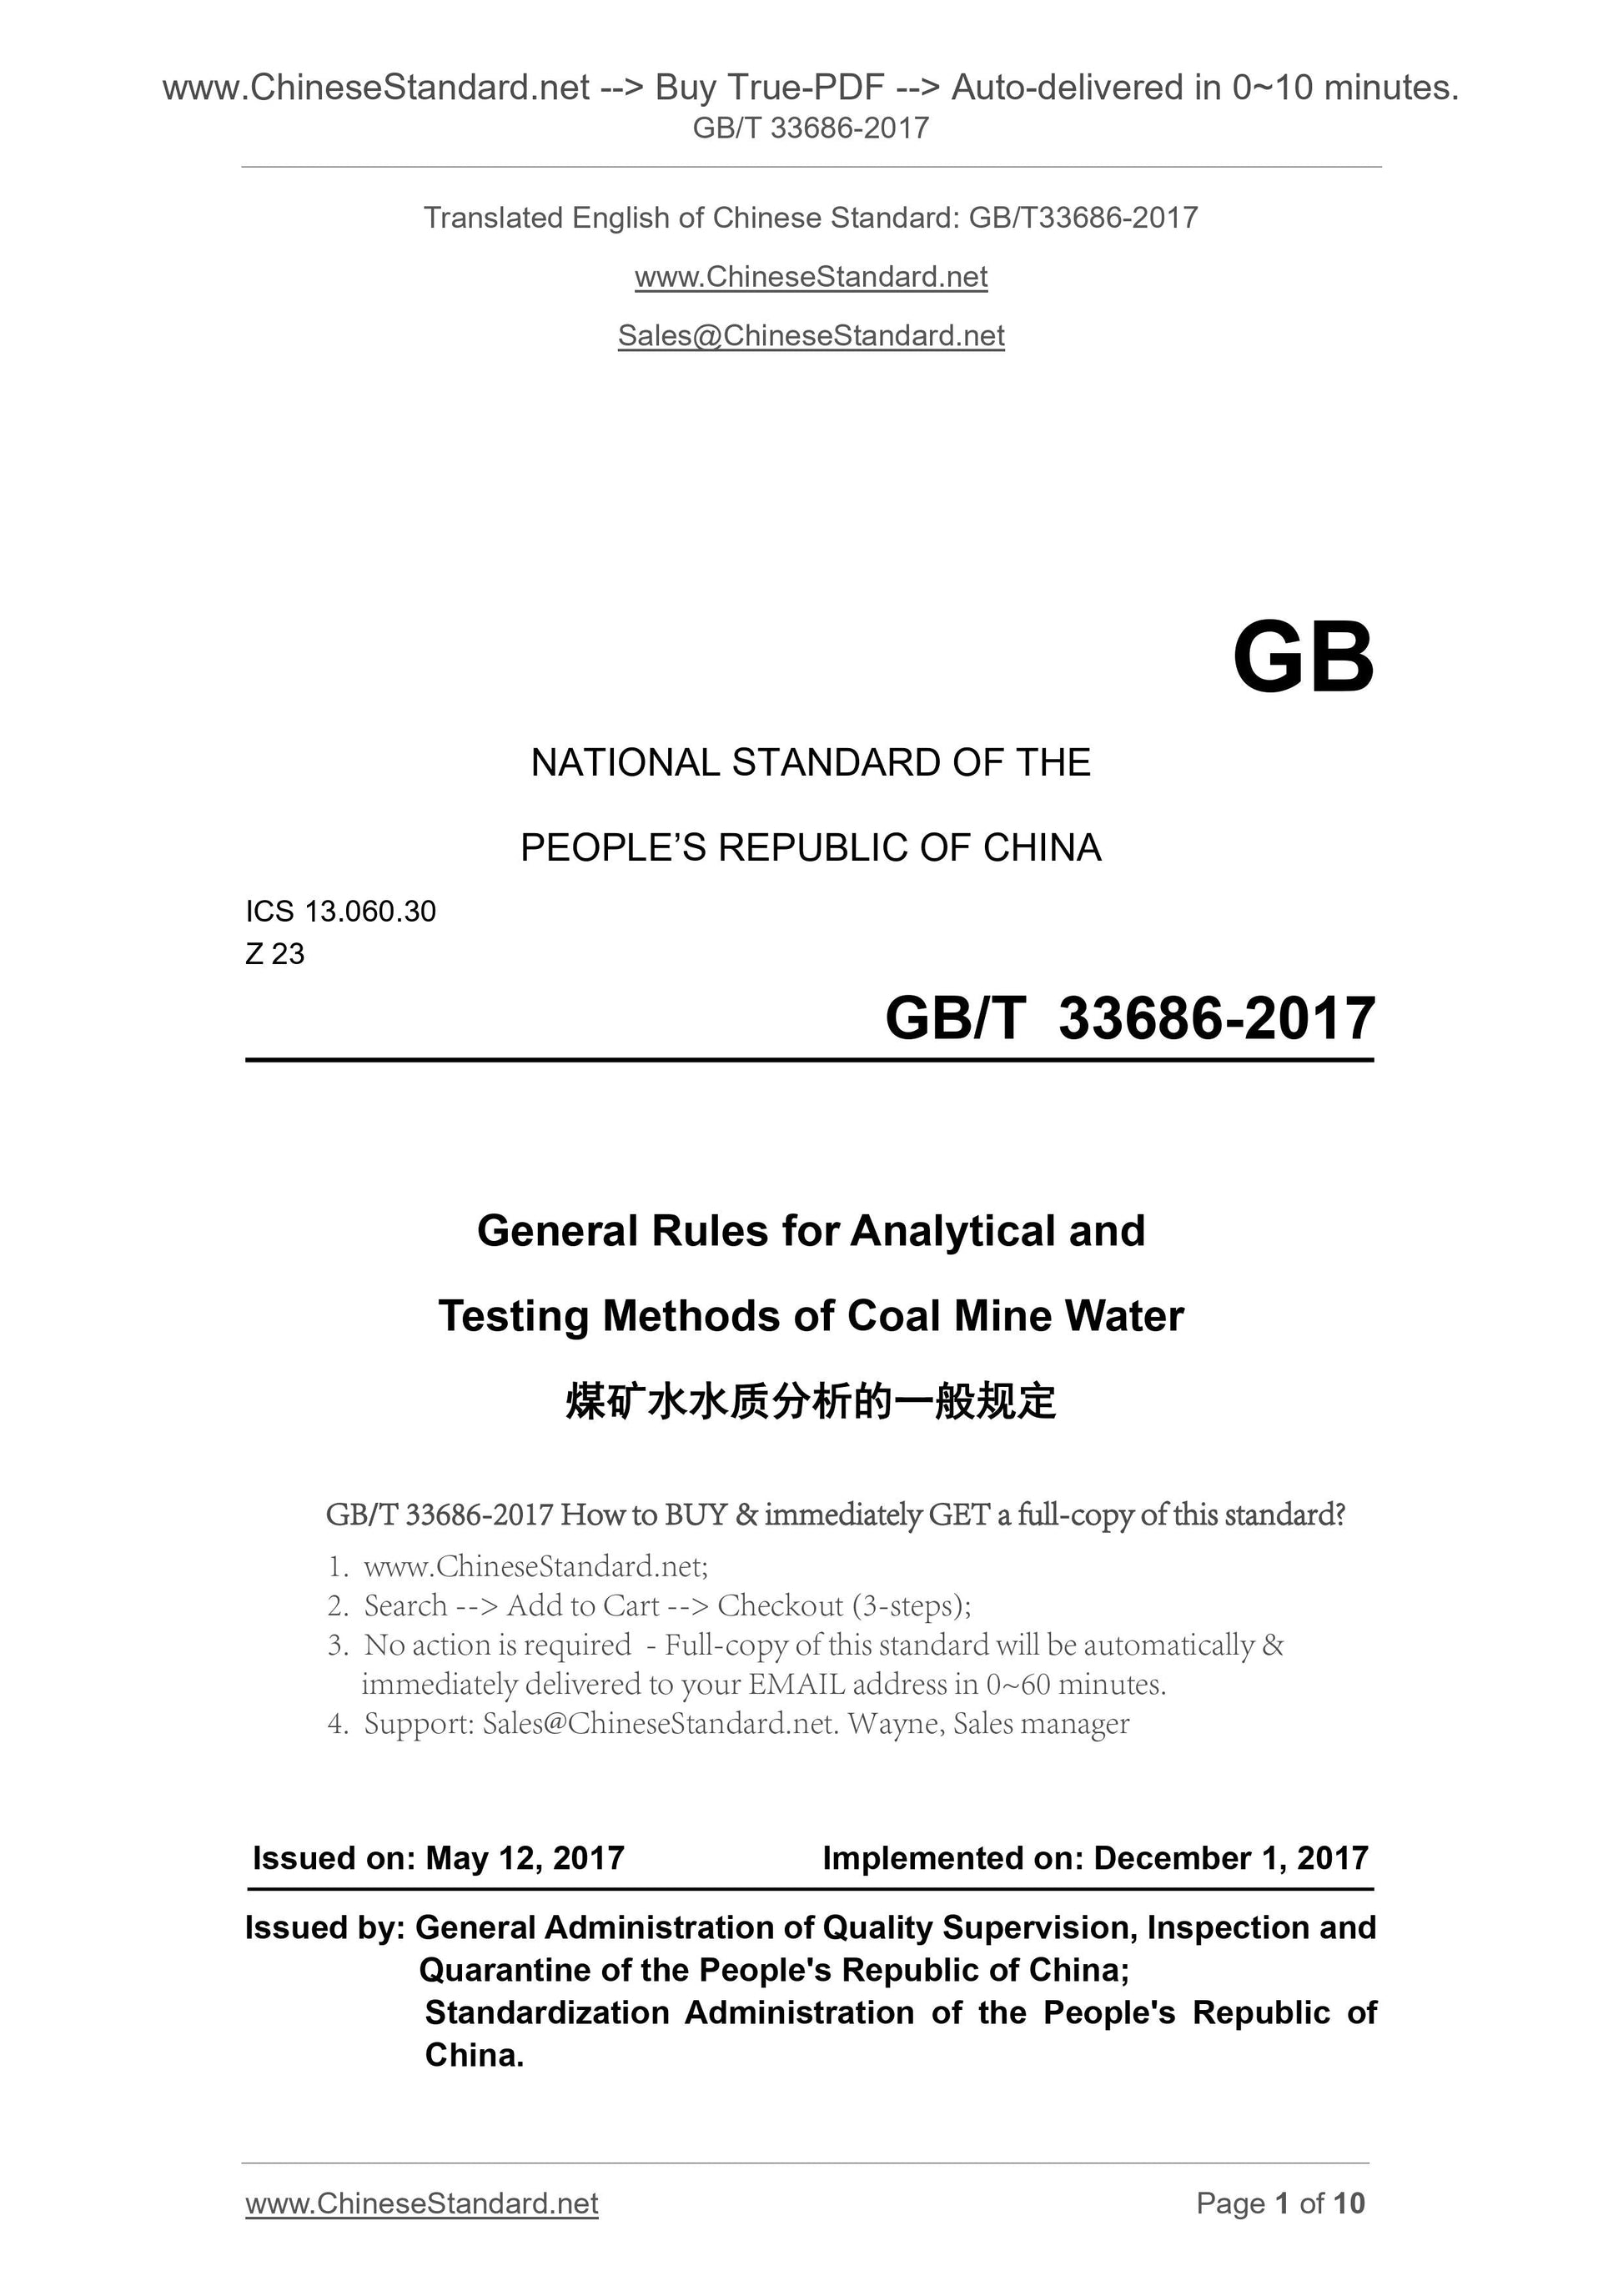 GB/T 33686-2017 Page 1